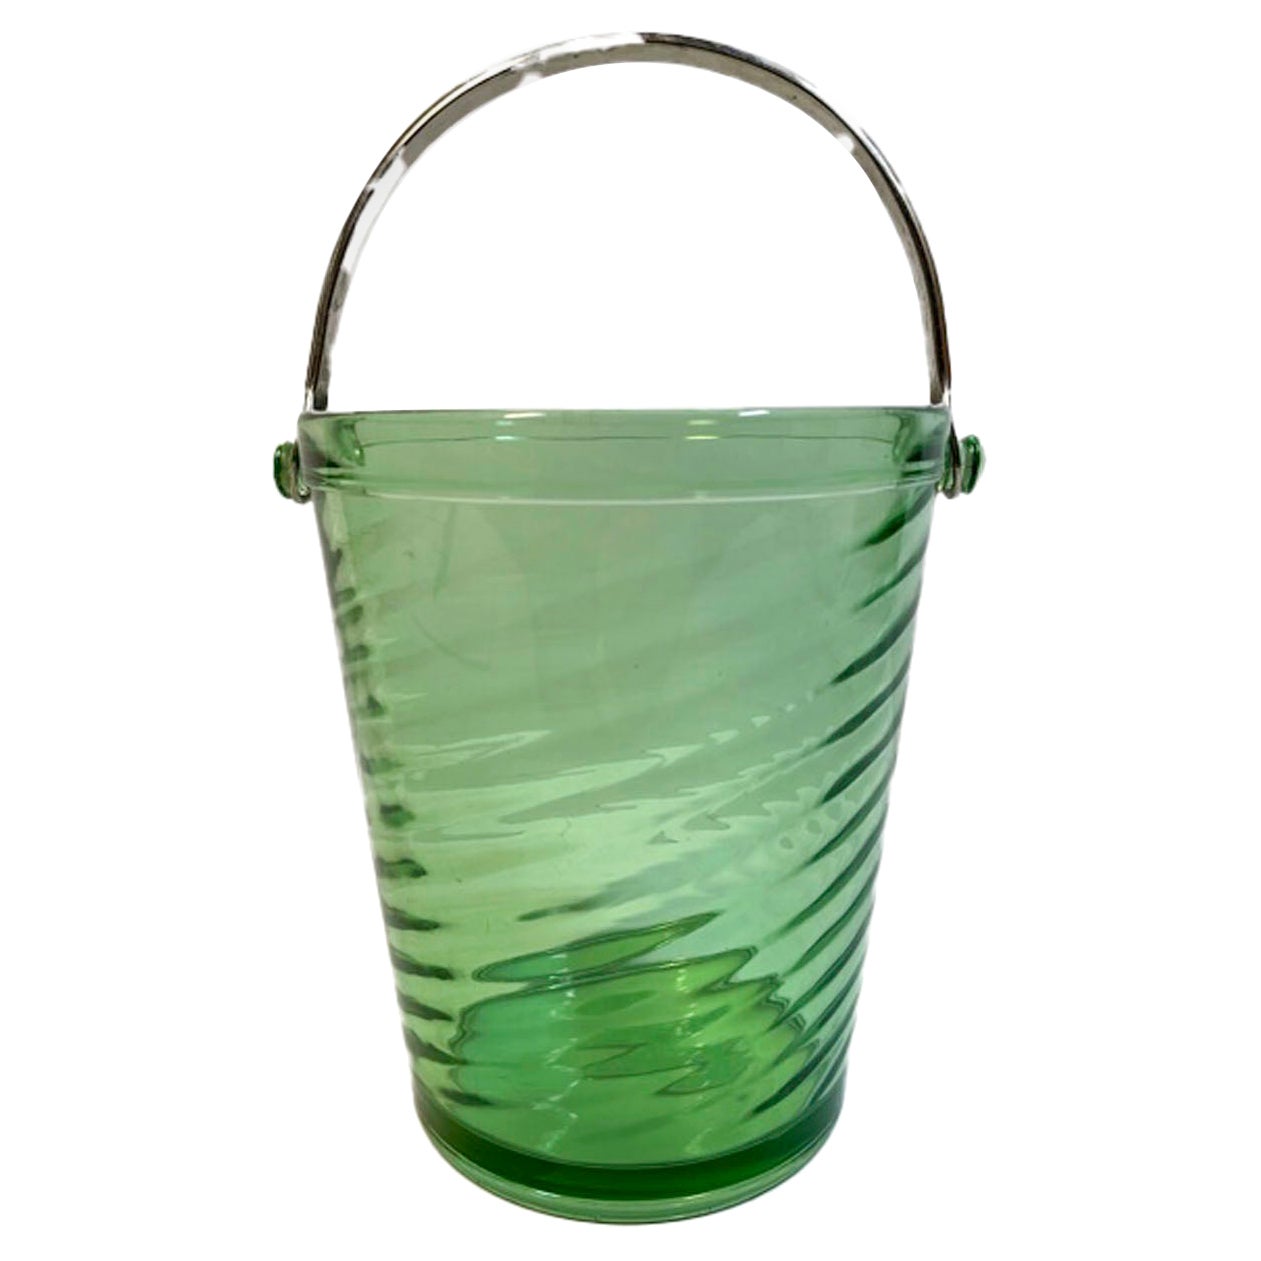 Art Deco Swirled Green Glass, Pail-Form Ice Bucket with Swing Handle